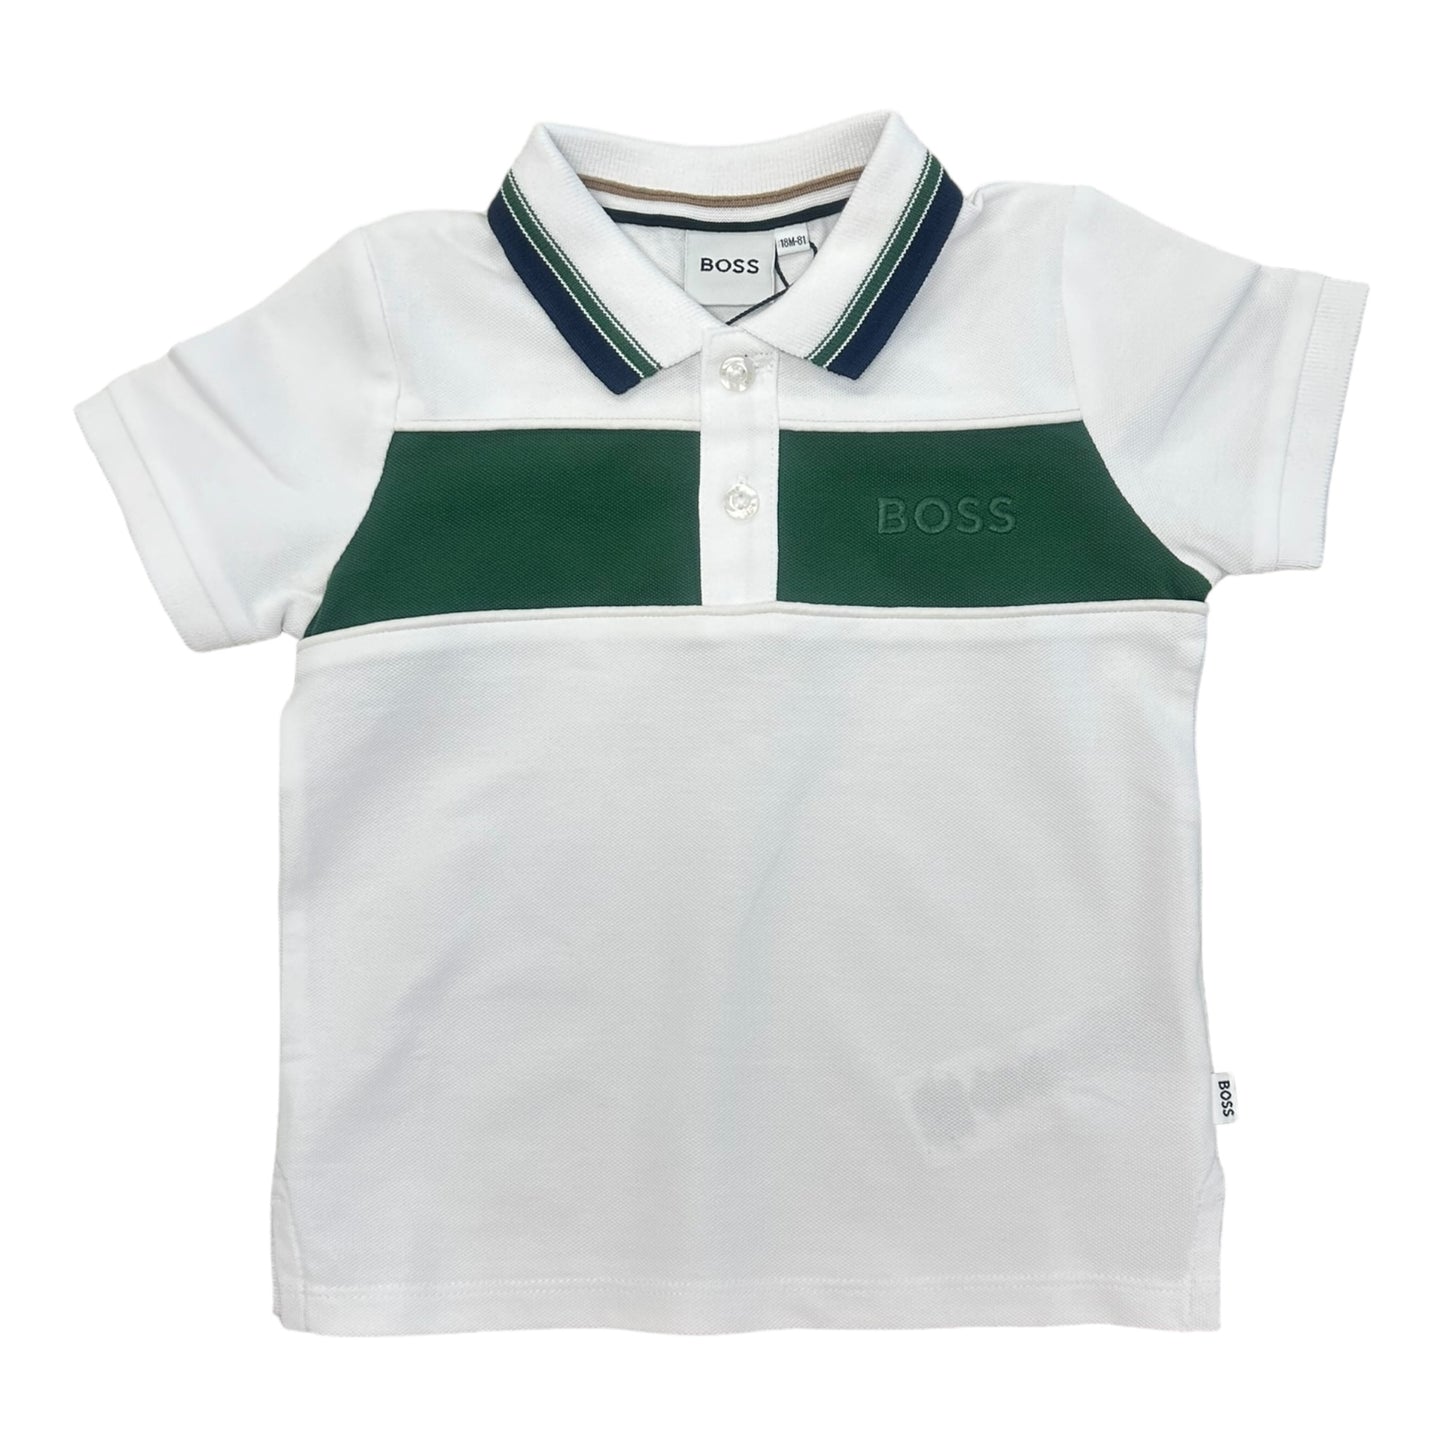 Boss, T-shirts, Boss - White polo T-shirt with green and navy trim, 18m - 3yrs